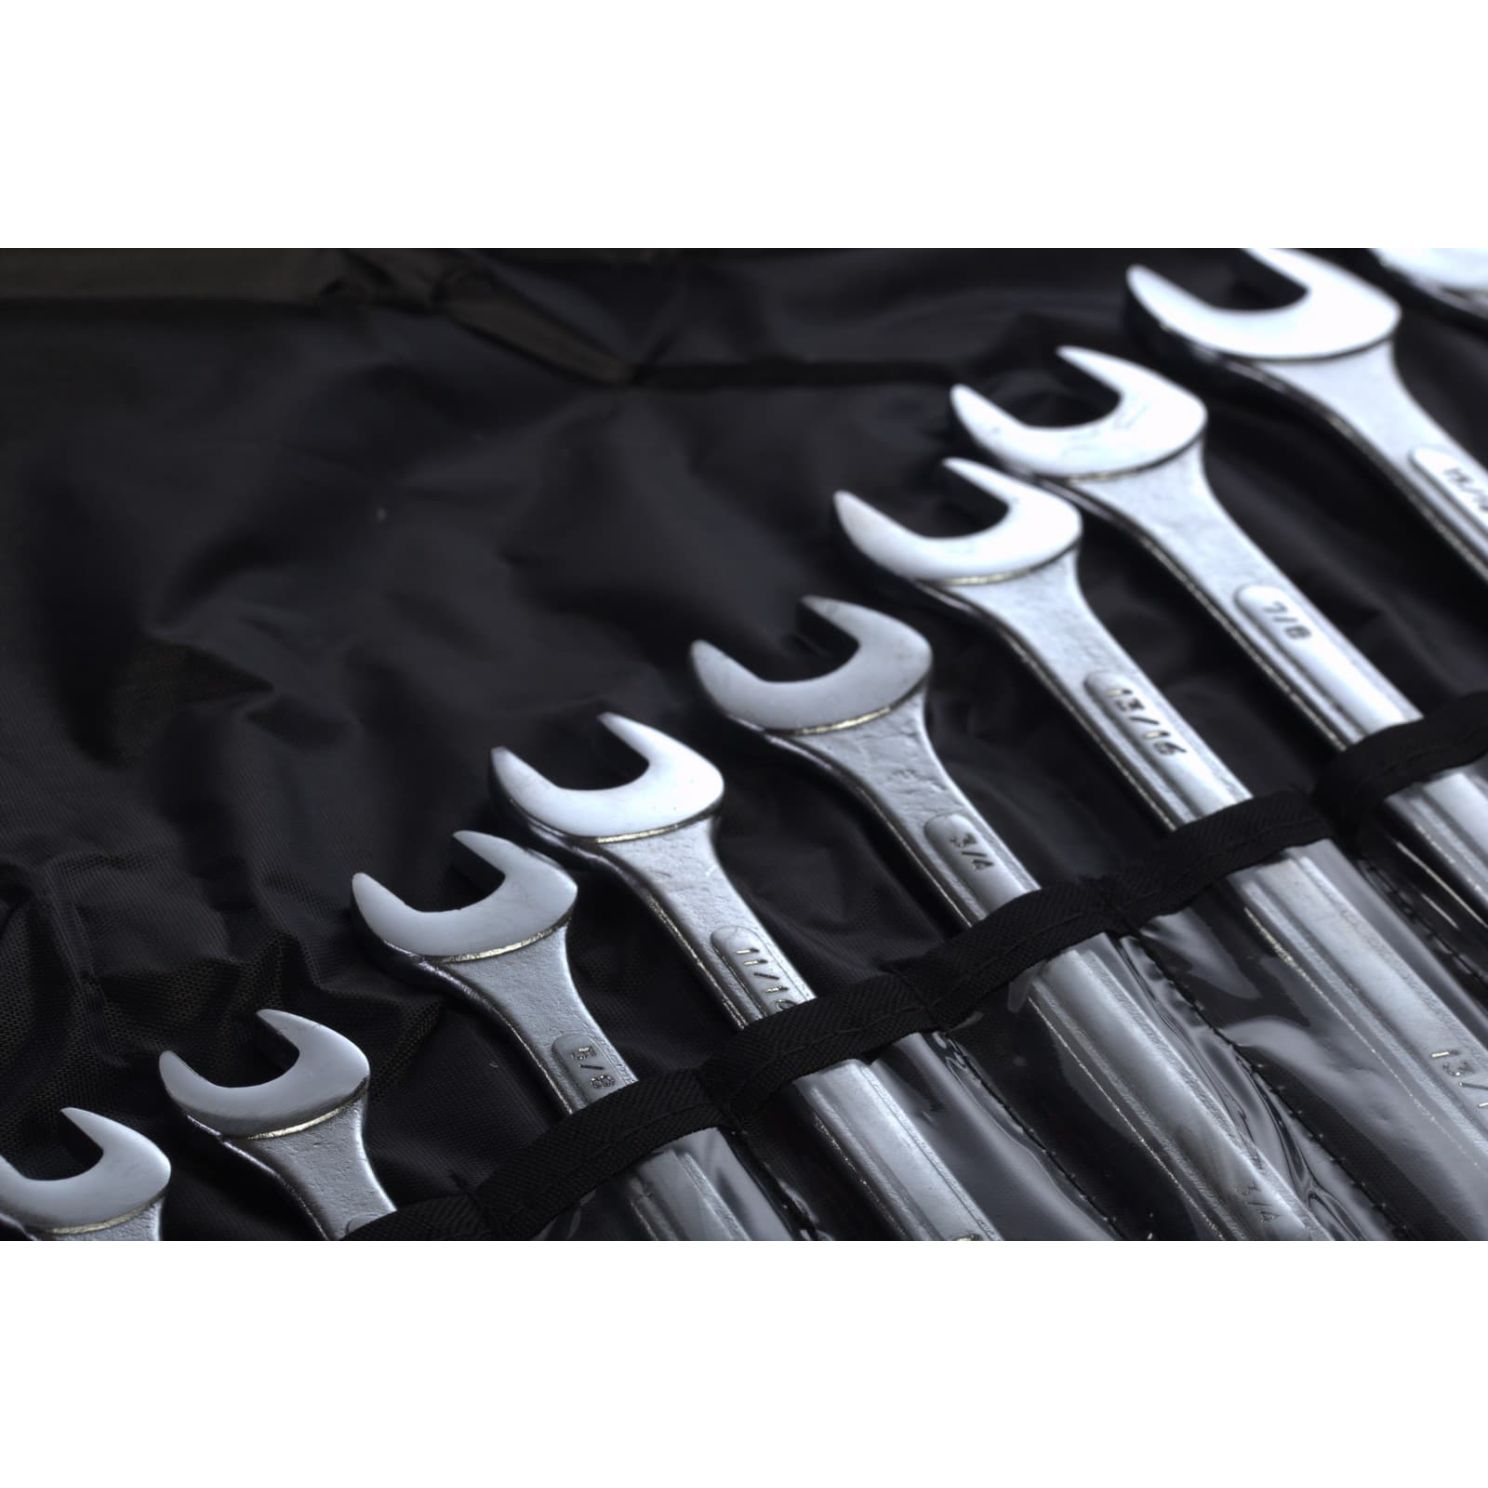 14pc. Standard combination wrench set